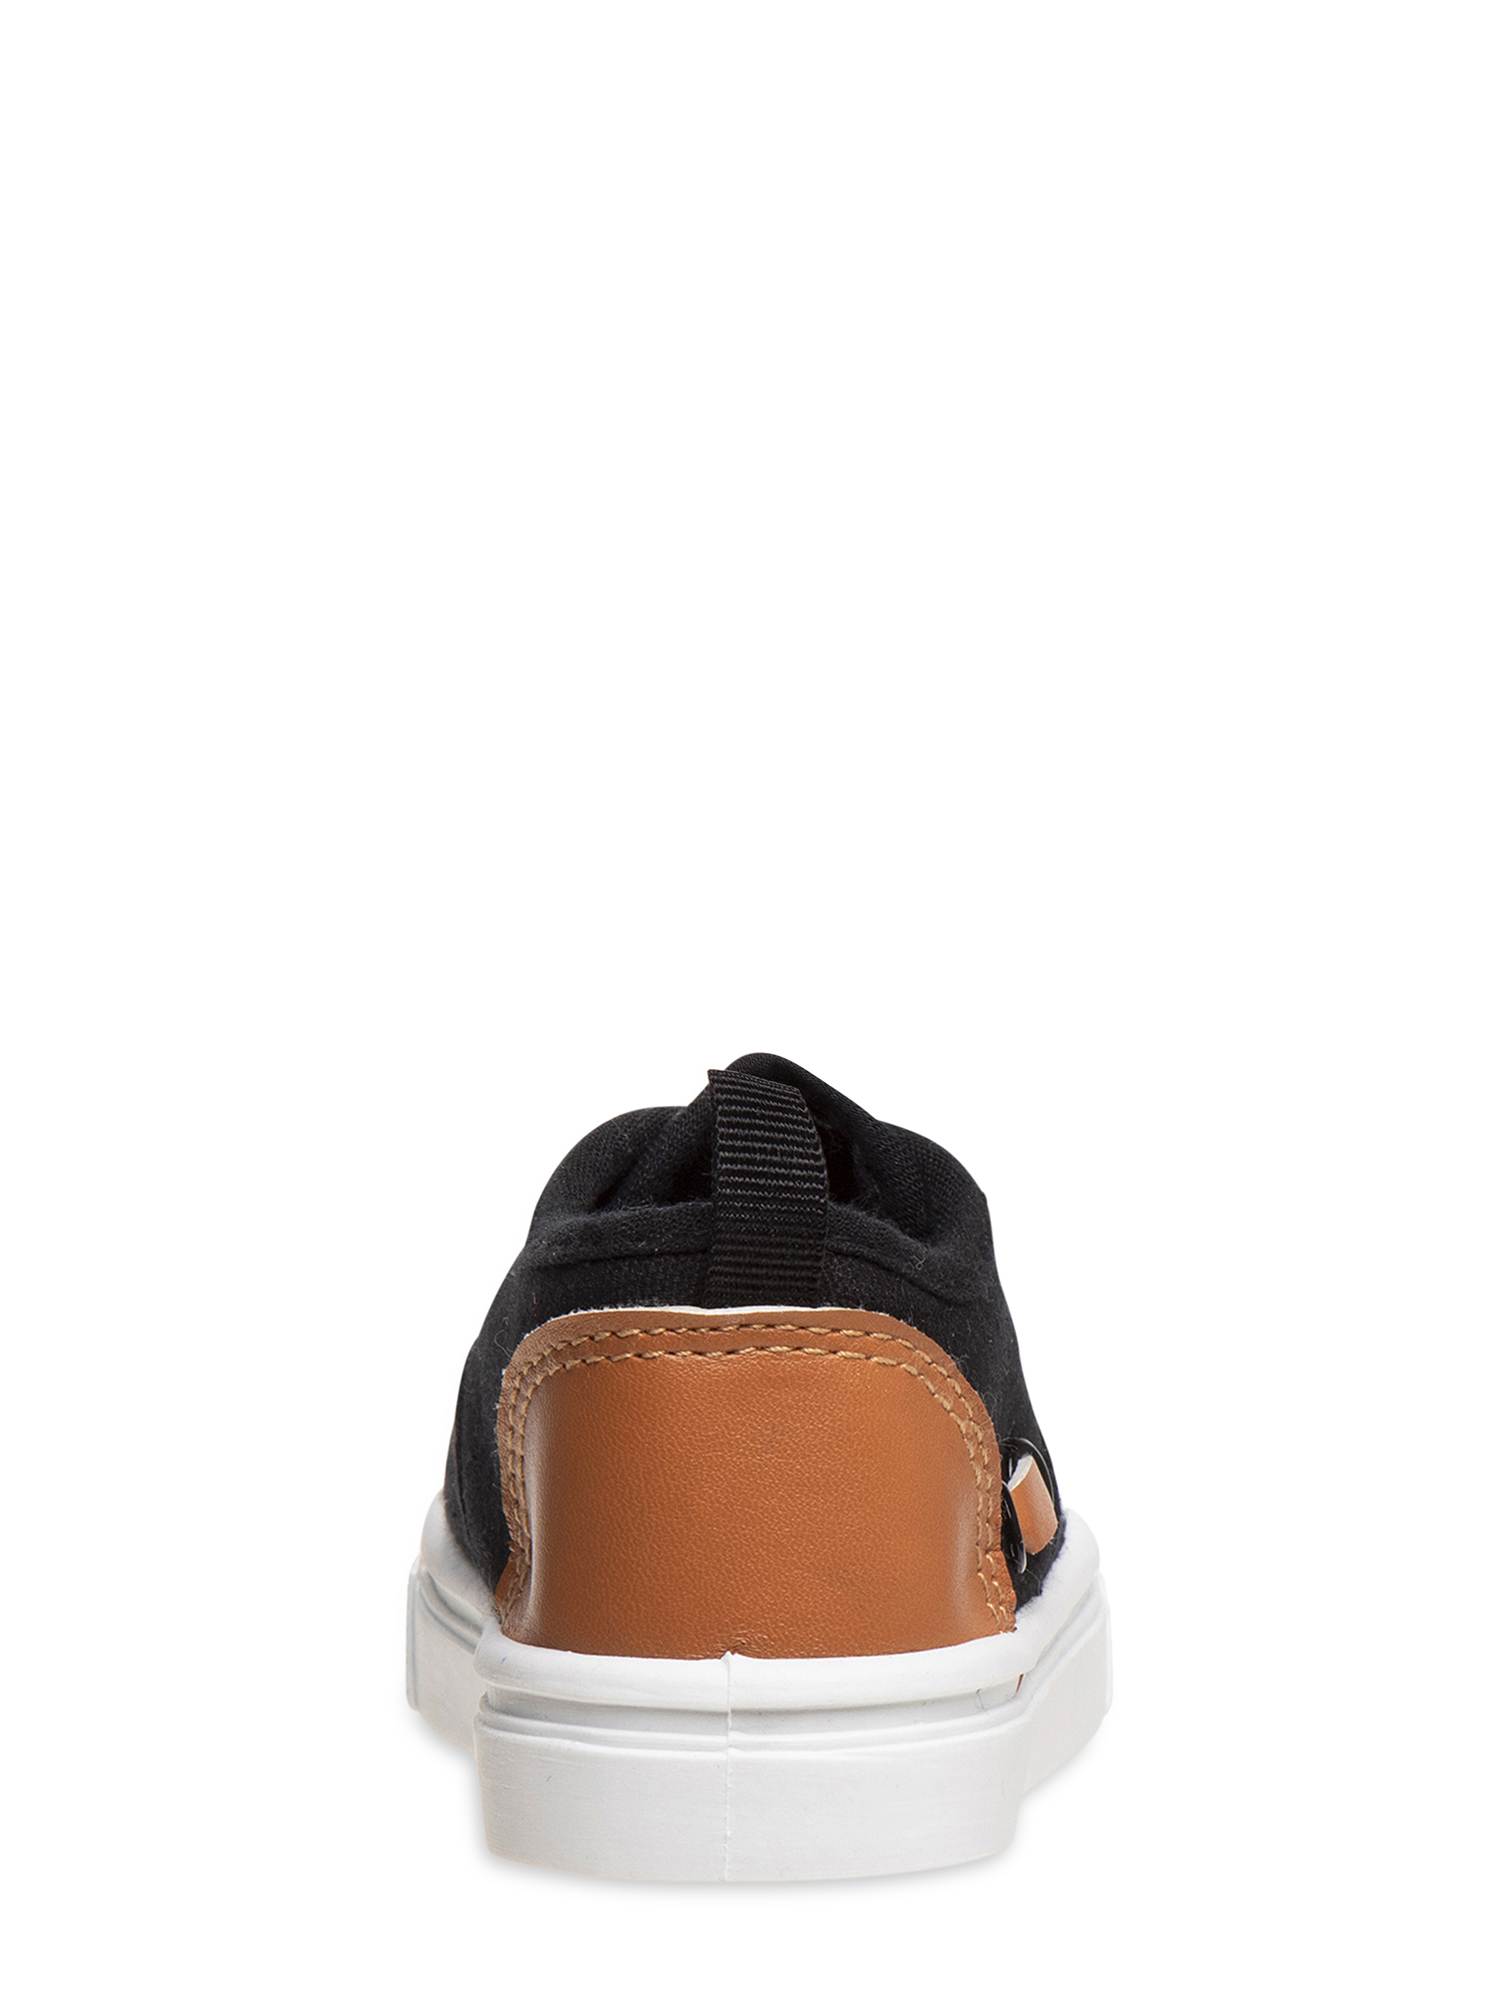 Beverly Hills Polo Club Toddler Boys Denim Colorblock Casual Sneakers - image 3 of 5